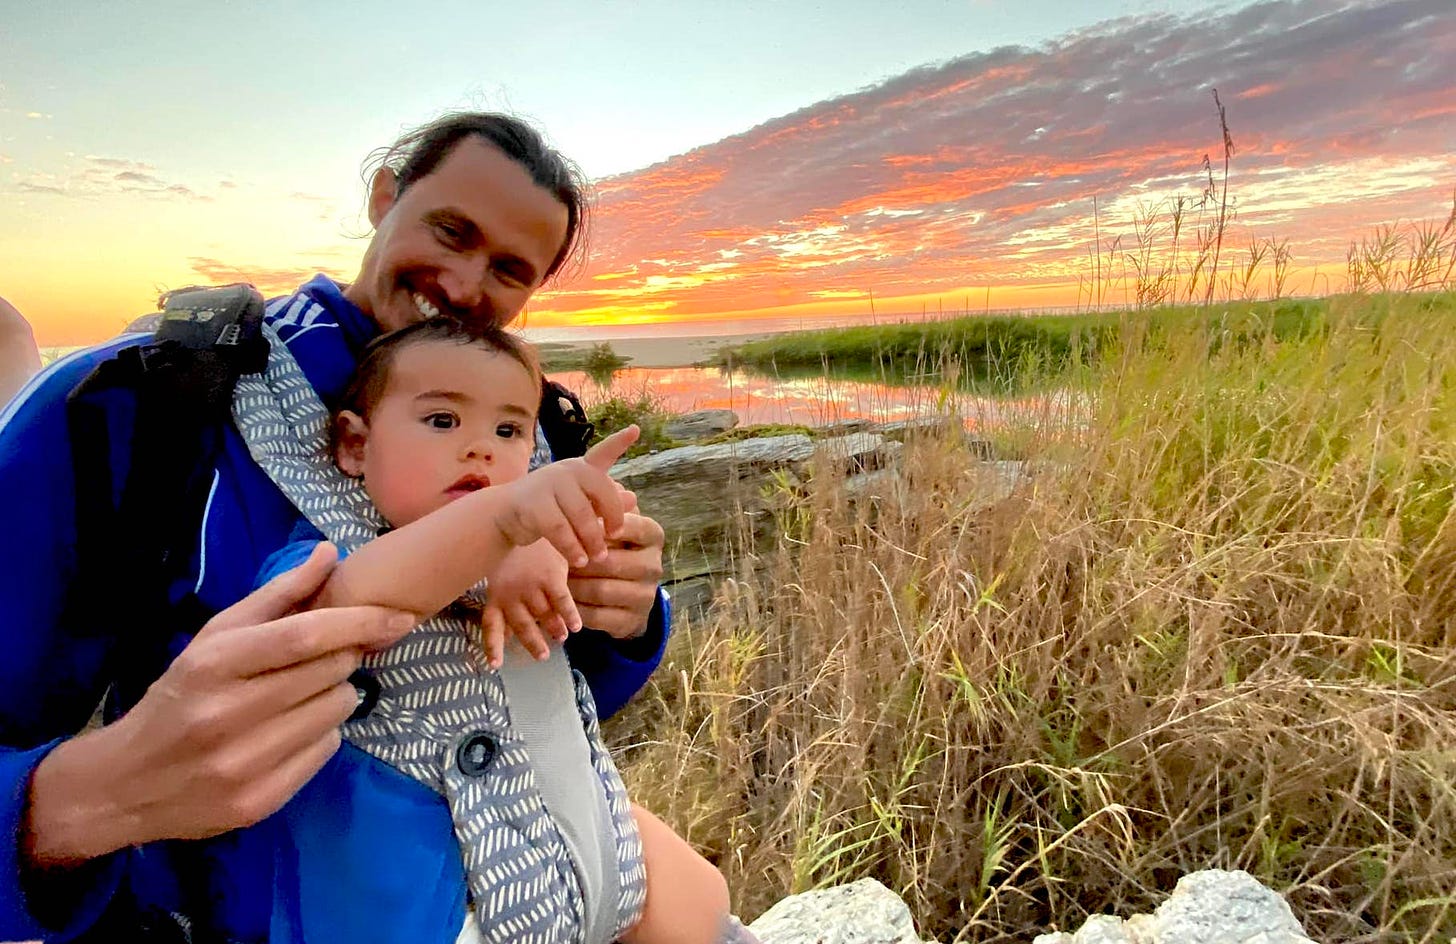 Gino with his very young son smiling against a sunset sky